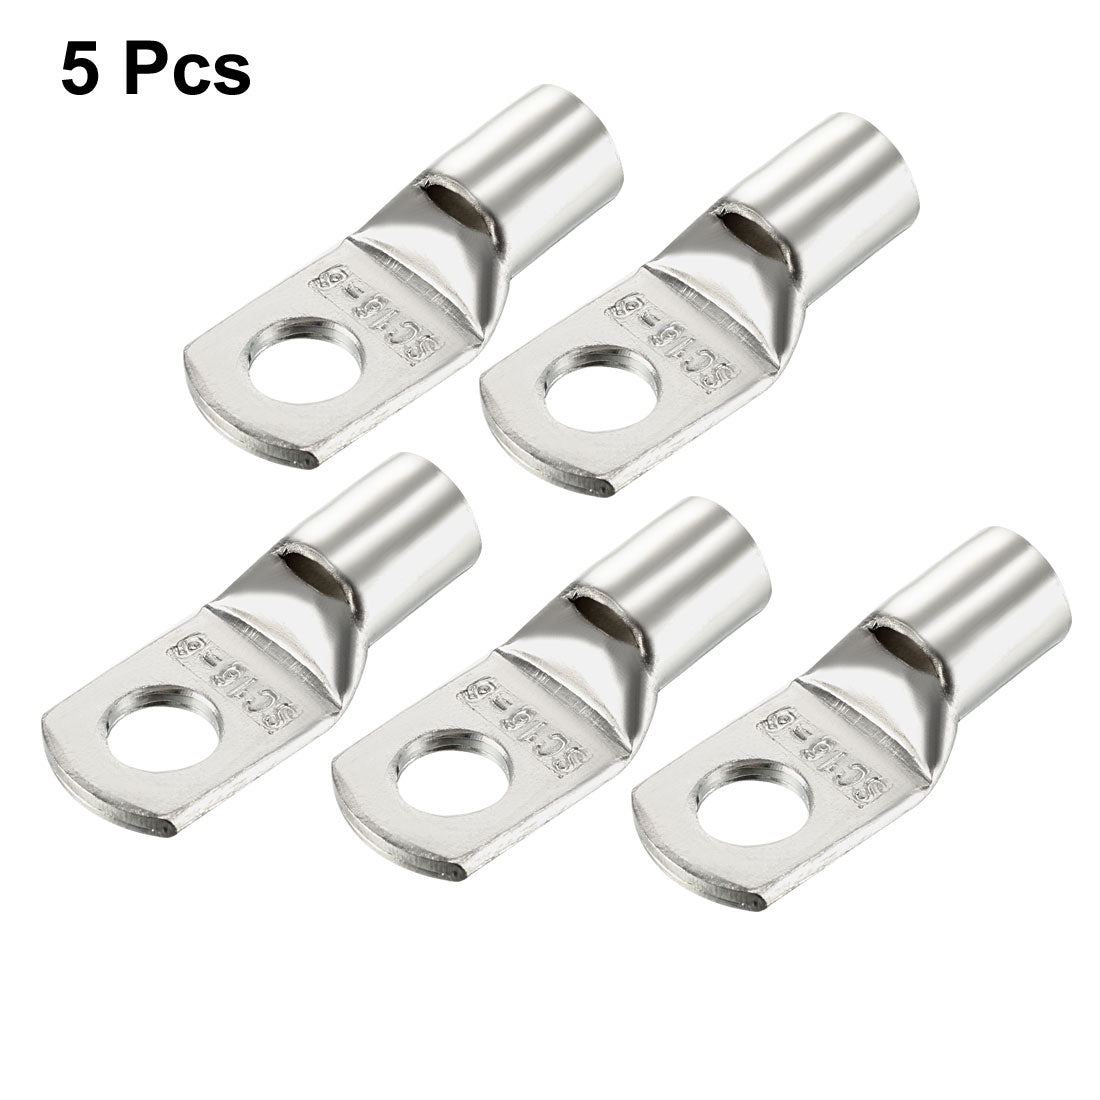 uxcell Uxcell 5Pcs SC16-6 Non-Insulated U-Type Copper Crimp Terminals 6mm2 Wire Connector Silver Tone